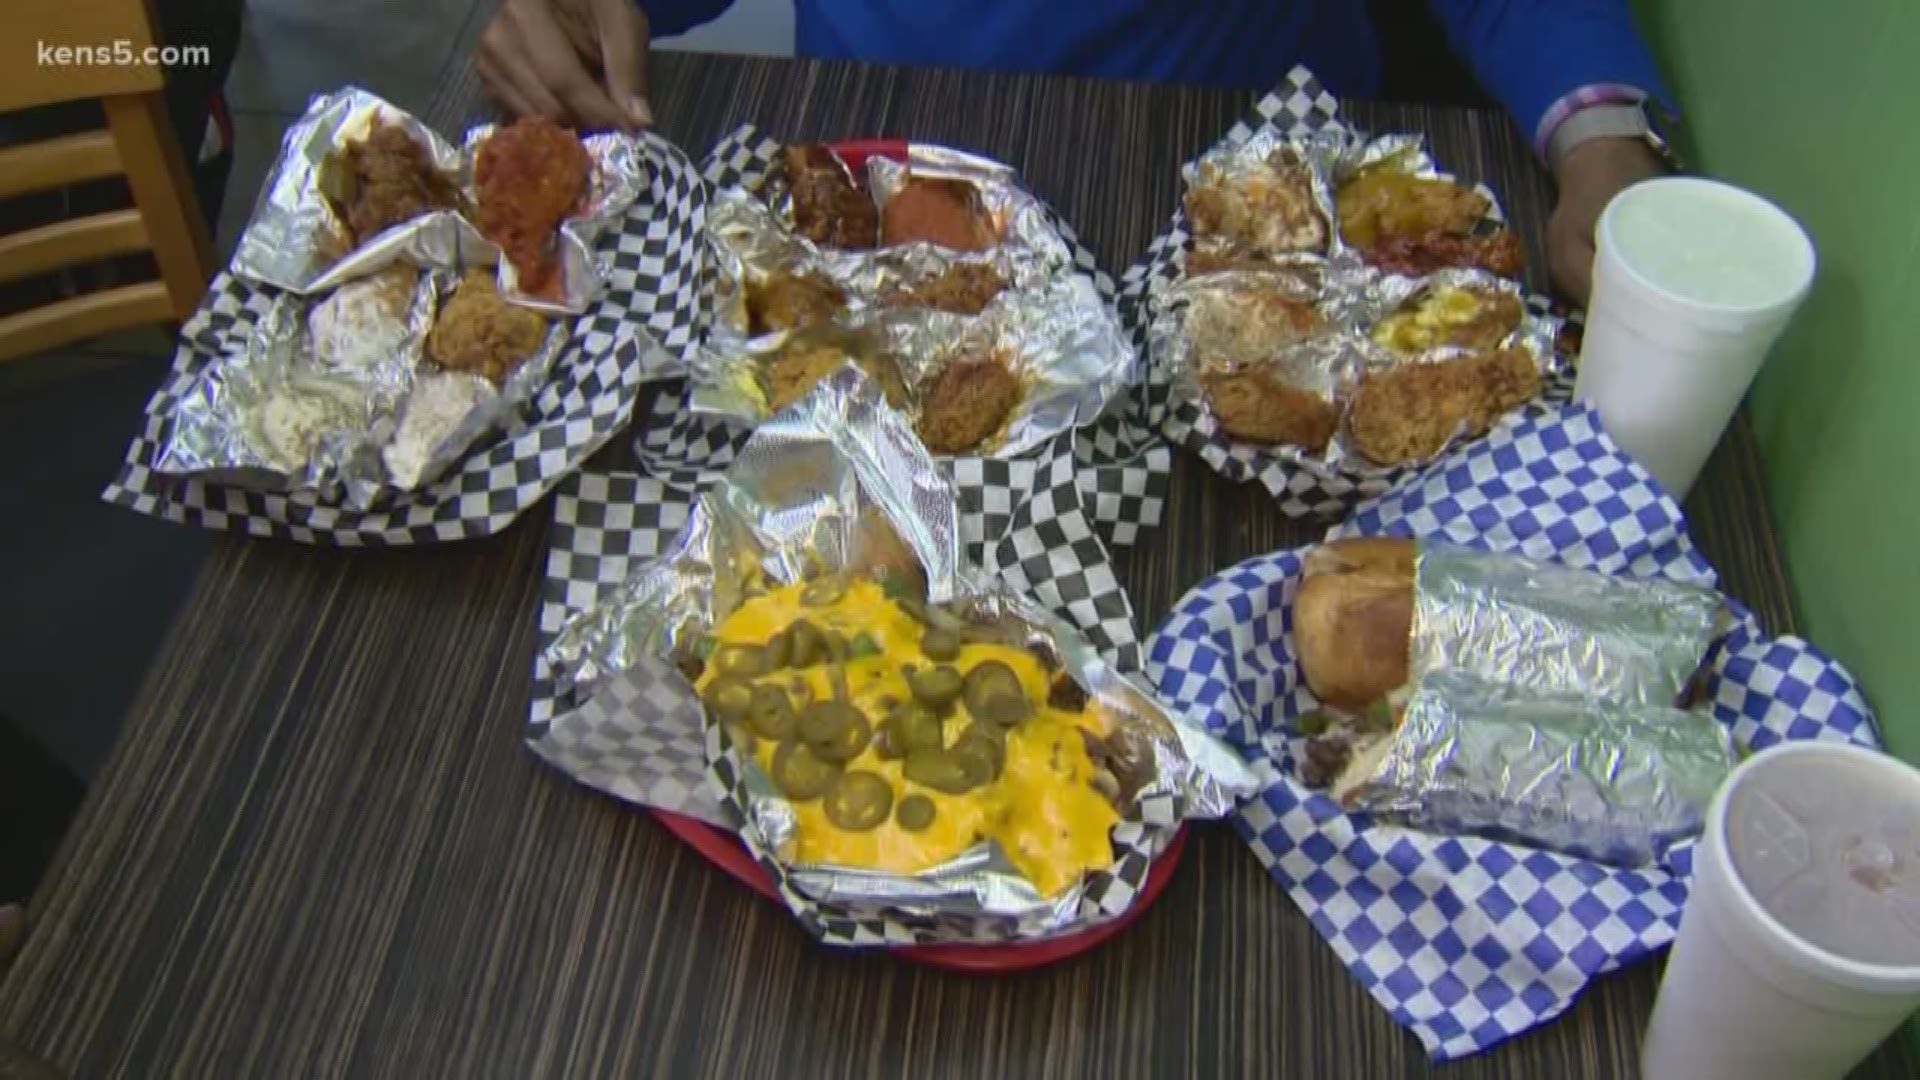 KENS 5's Marvin Hurst is checking out Wayne's Wings, which was voted best wings in Texas.